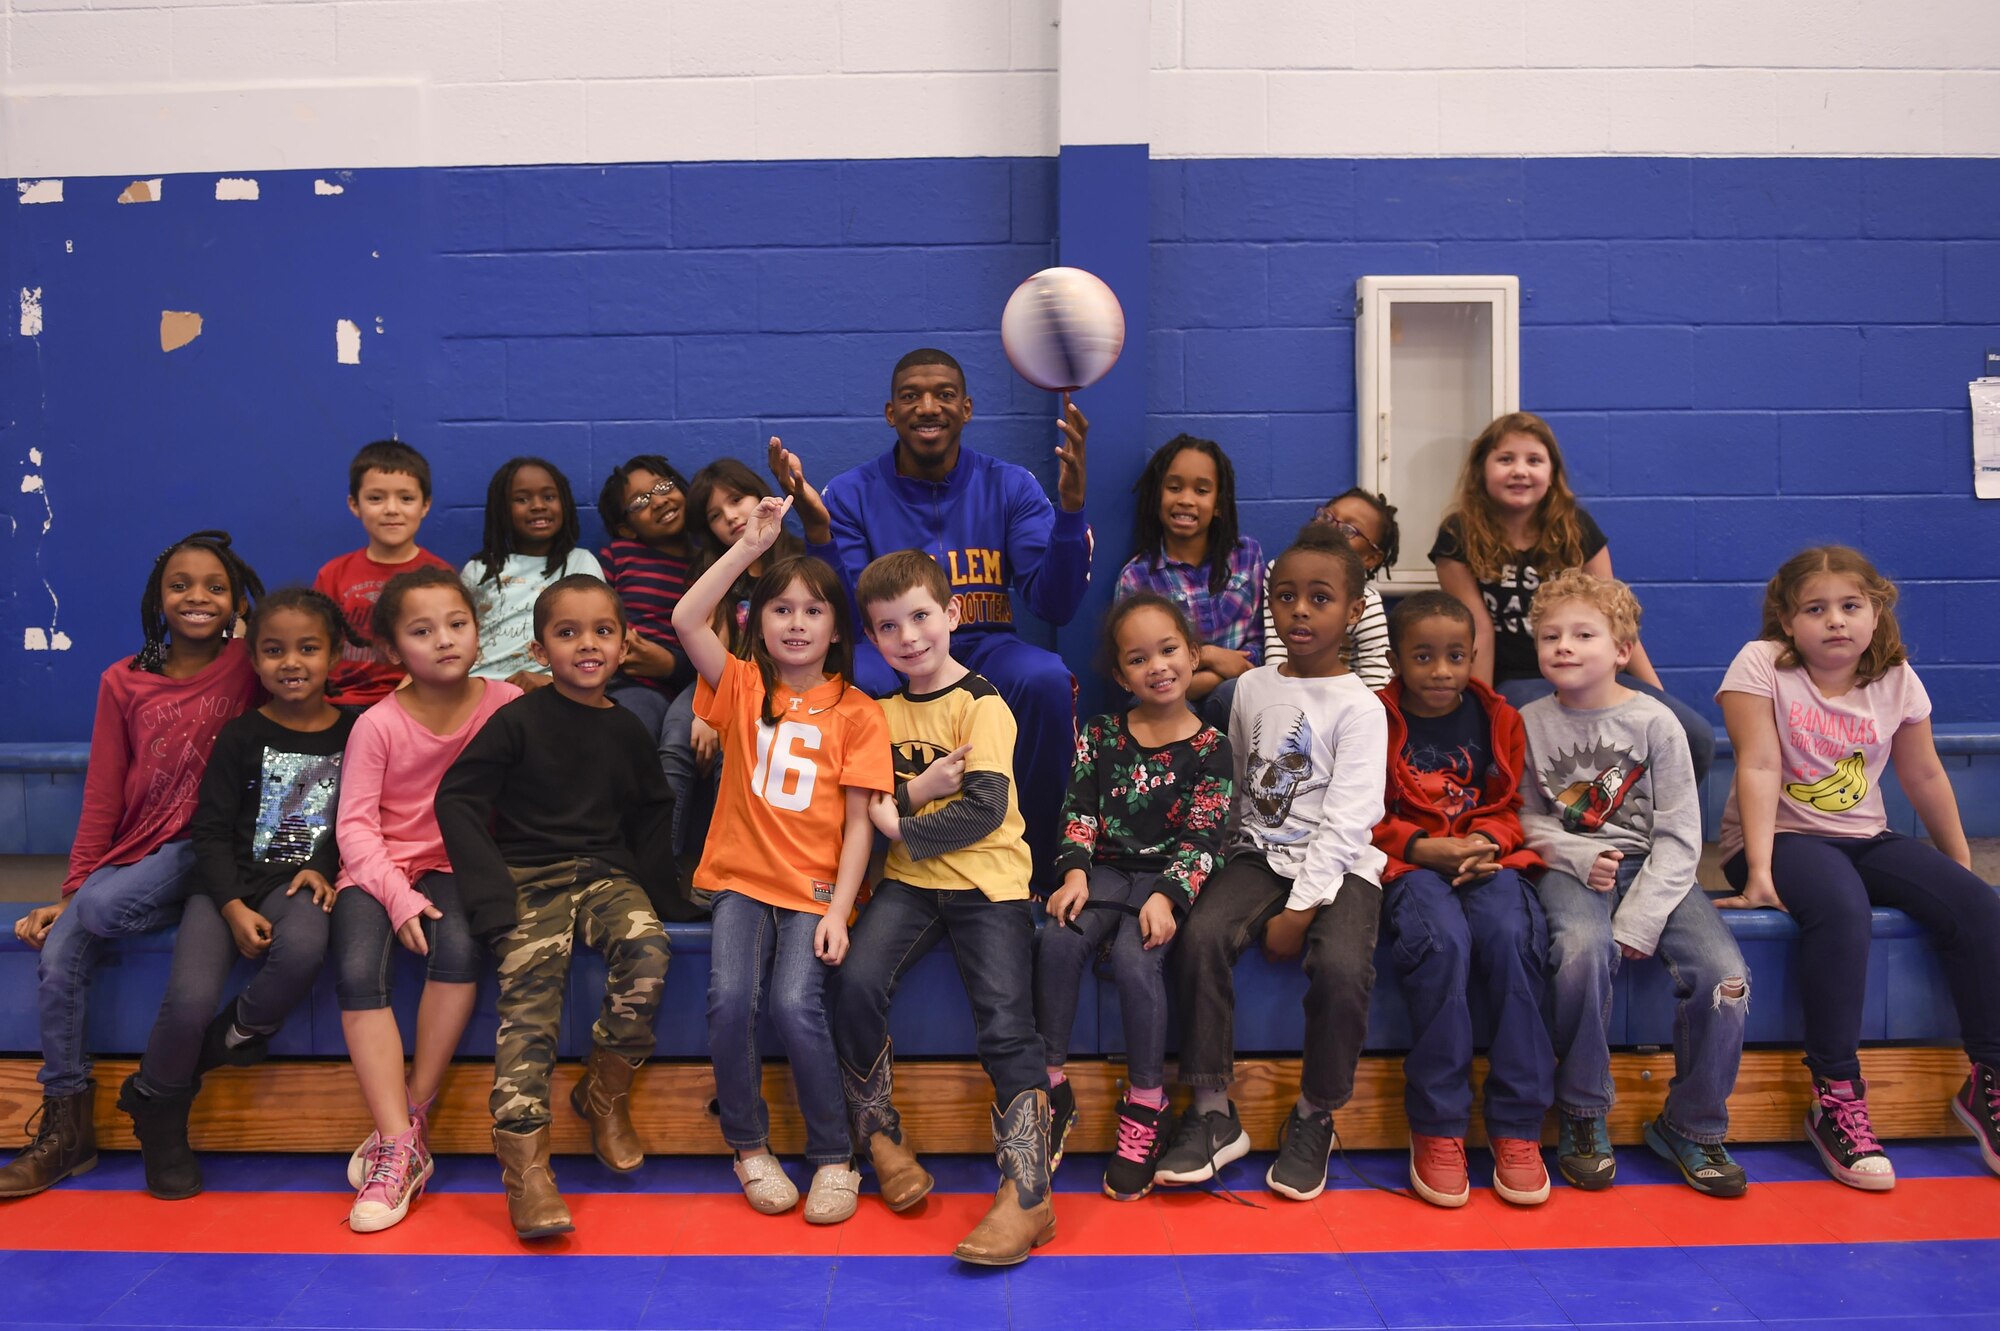 Anthony “Buckets” Blakes, a Harlem Globetrotters point guard, performs a basketball trick with a group of military children Jan. 20, 2017, at the Little Rock Air Force Base Youth Center, Ark. In March 2016, Buckets made the highest shot in team history. From approximately 300 ft. above Georgia’s Stone Mountain, he connected with a shot to a basketball hoop located below. (U.S. Air Force photo by Senior Airman Harry Brexel) 